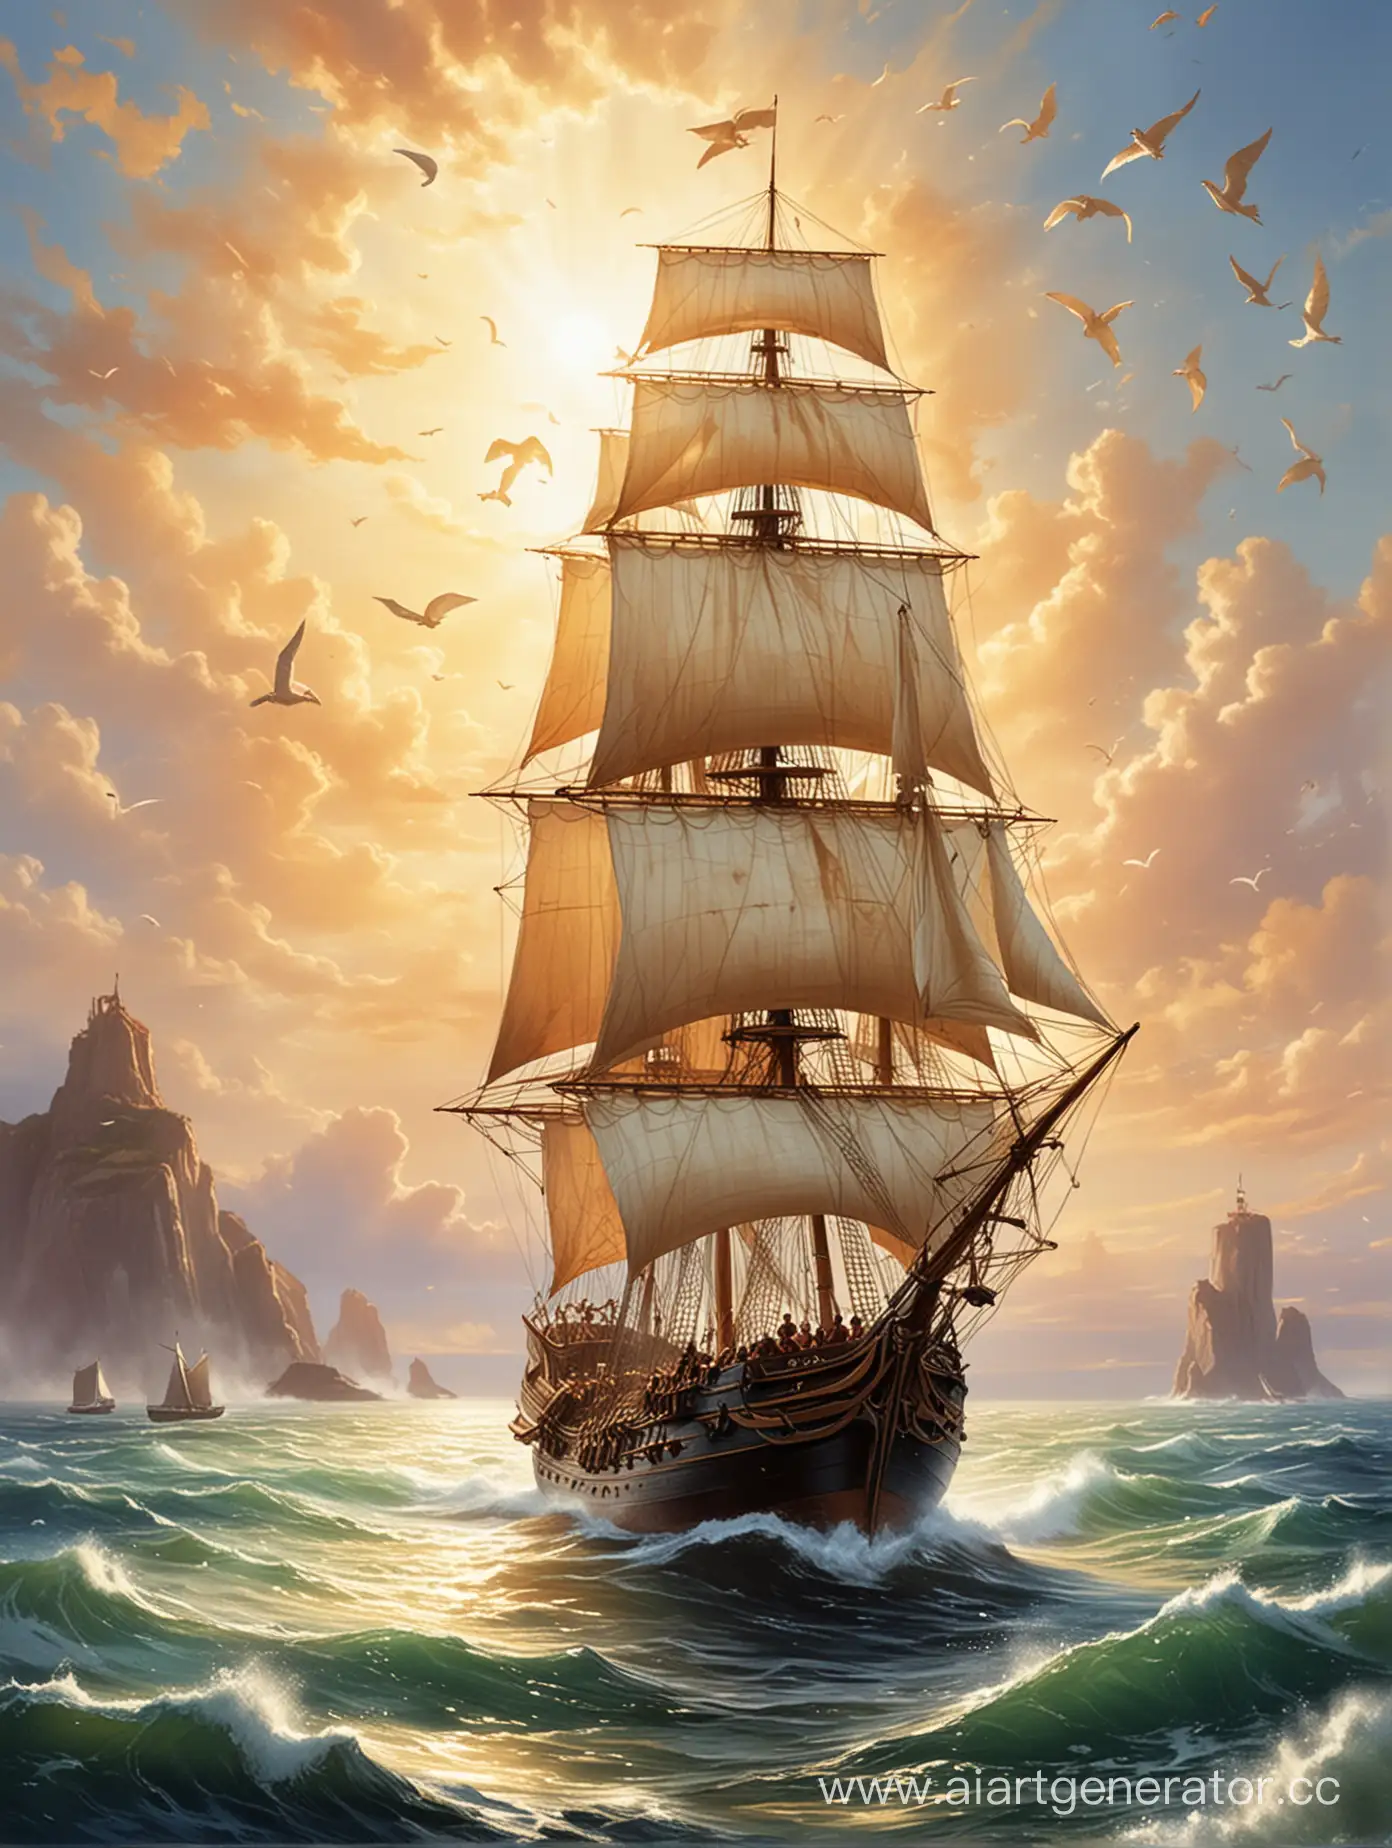 Sails-of-Hope-and-Dreams-Captivating-Oceanic-Journey-Poster